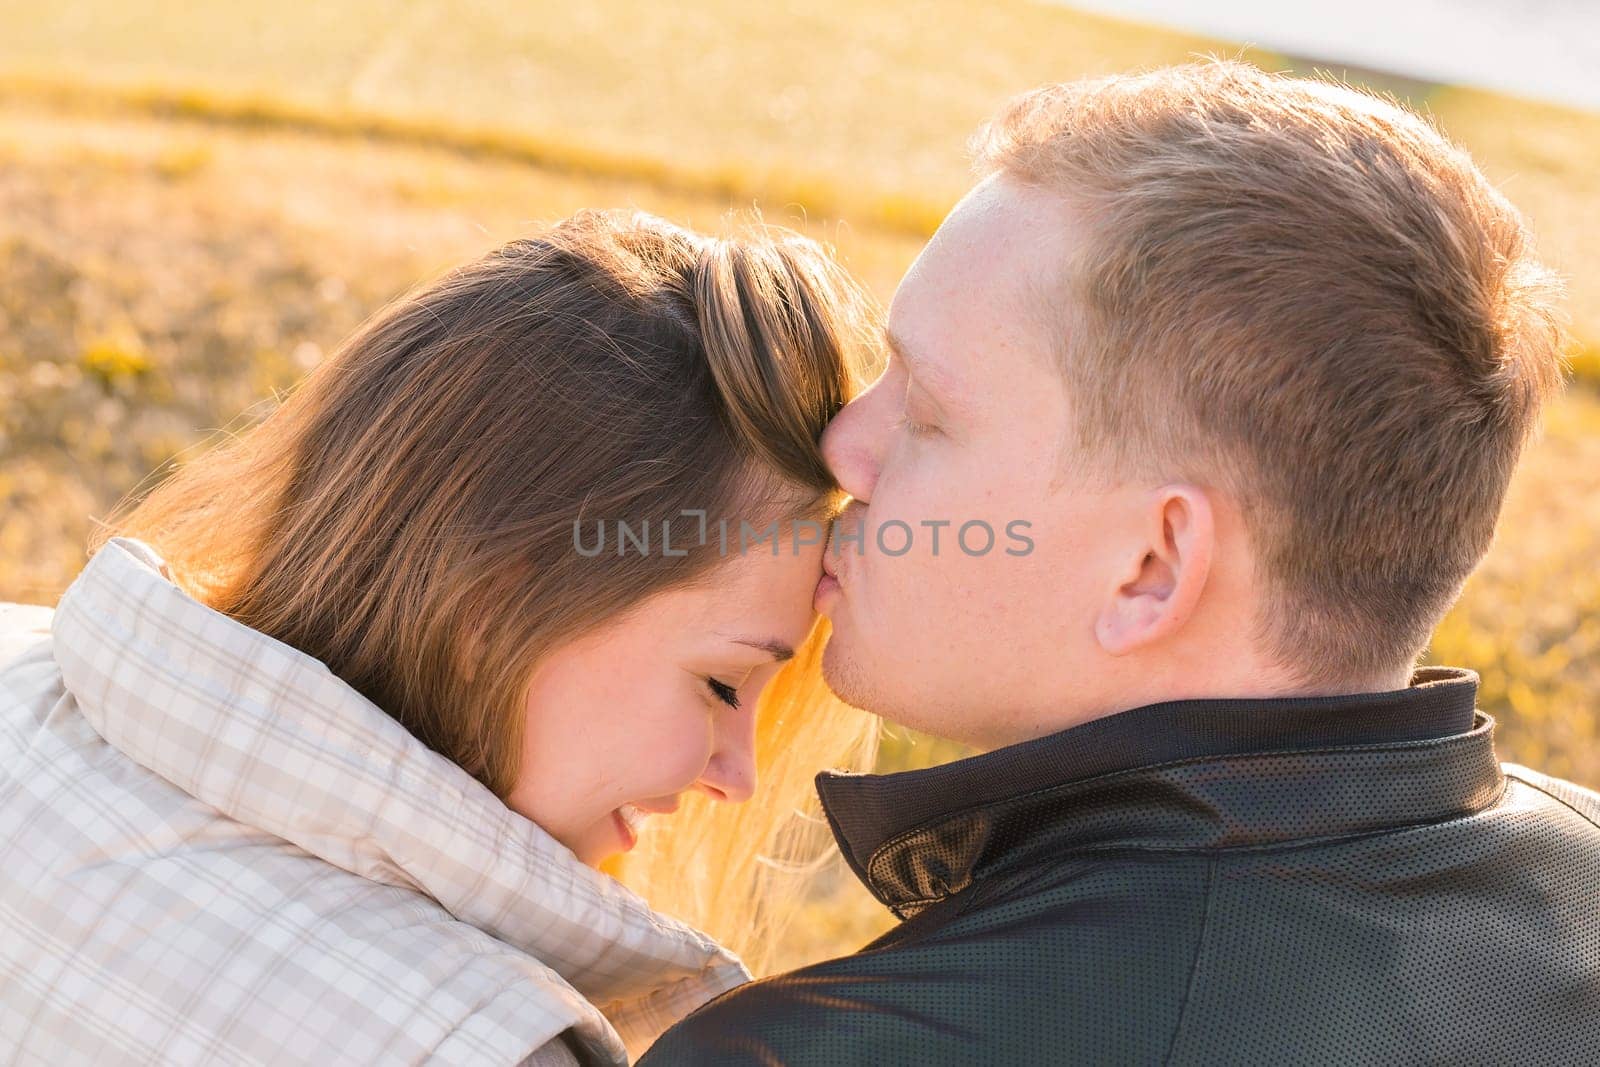 Sweet kiss. Handsome young man kissing his girlfriend on forehead in autumn park.